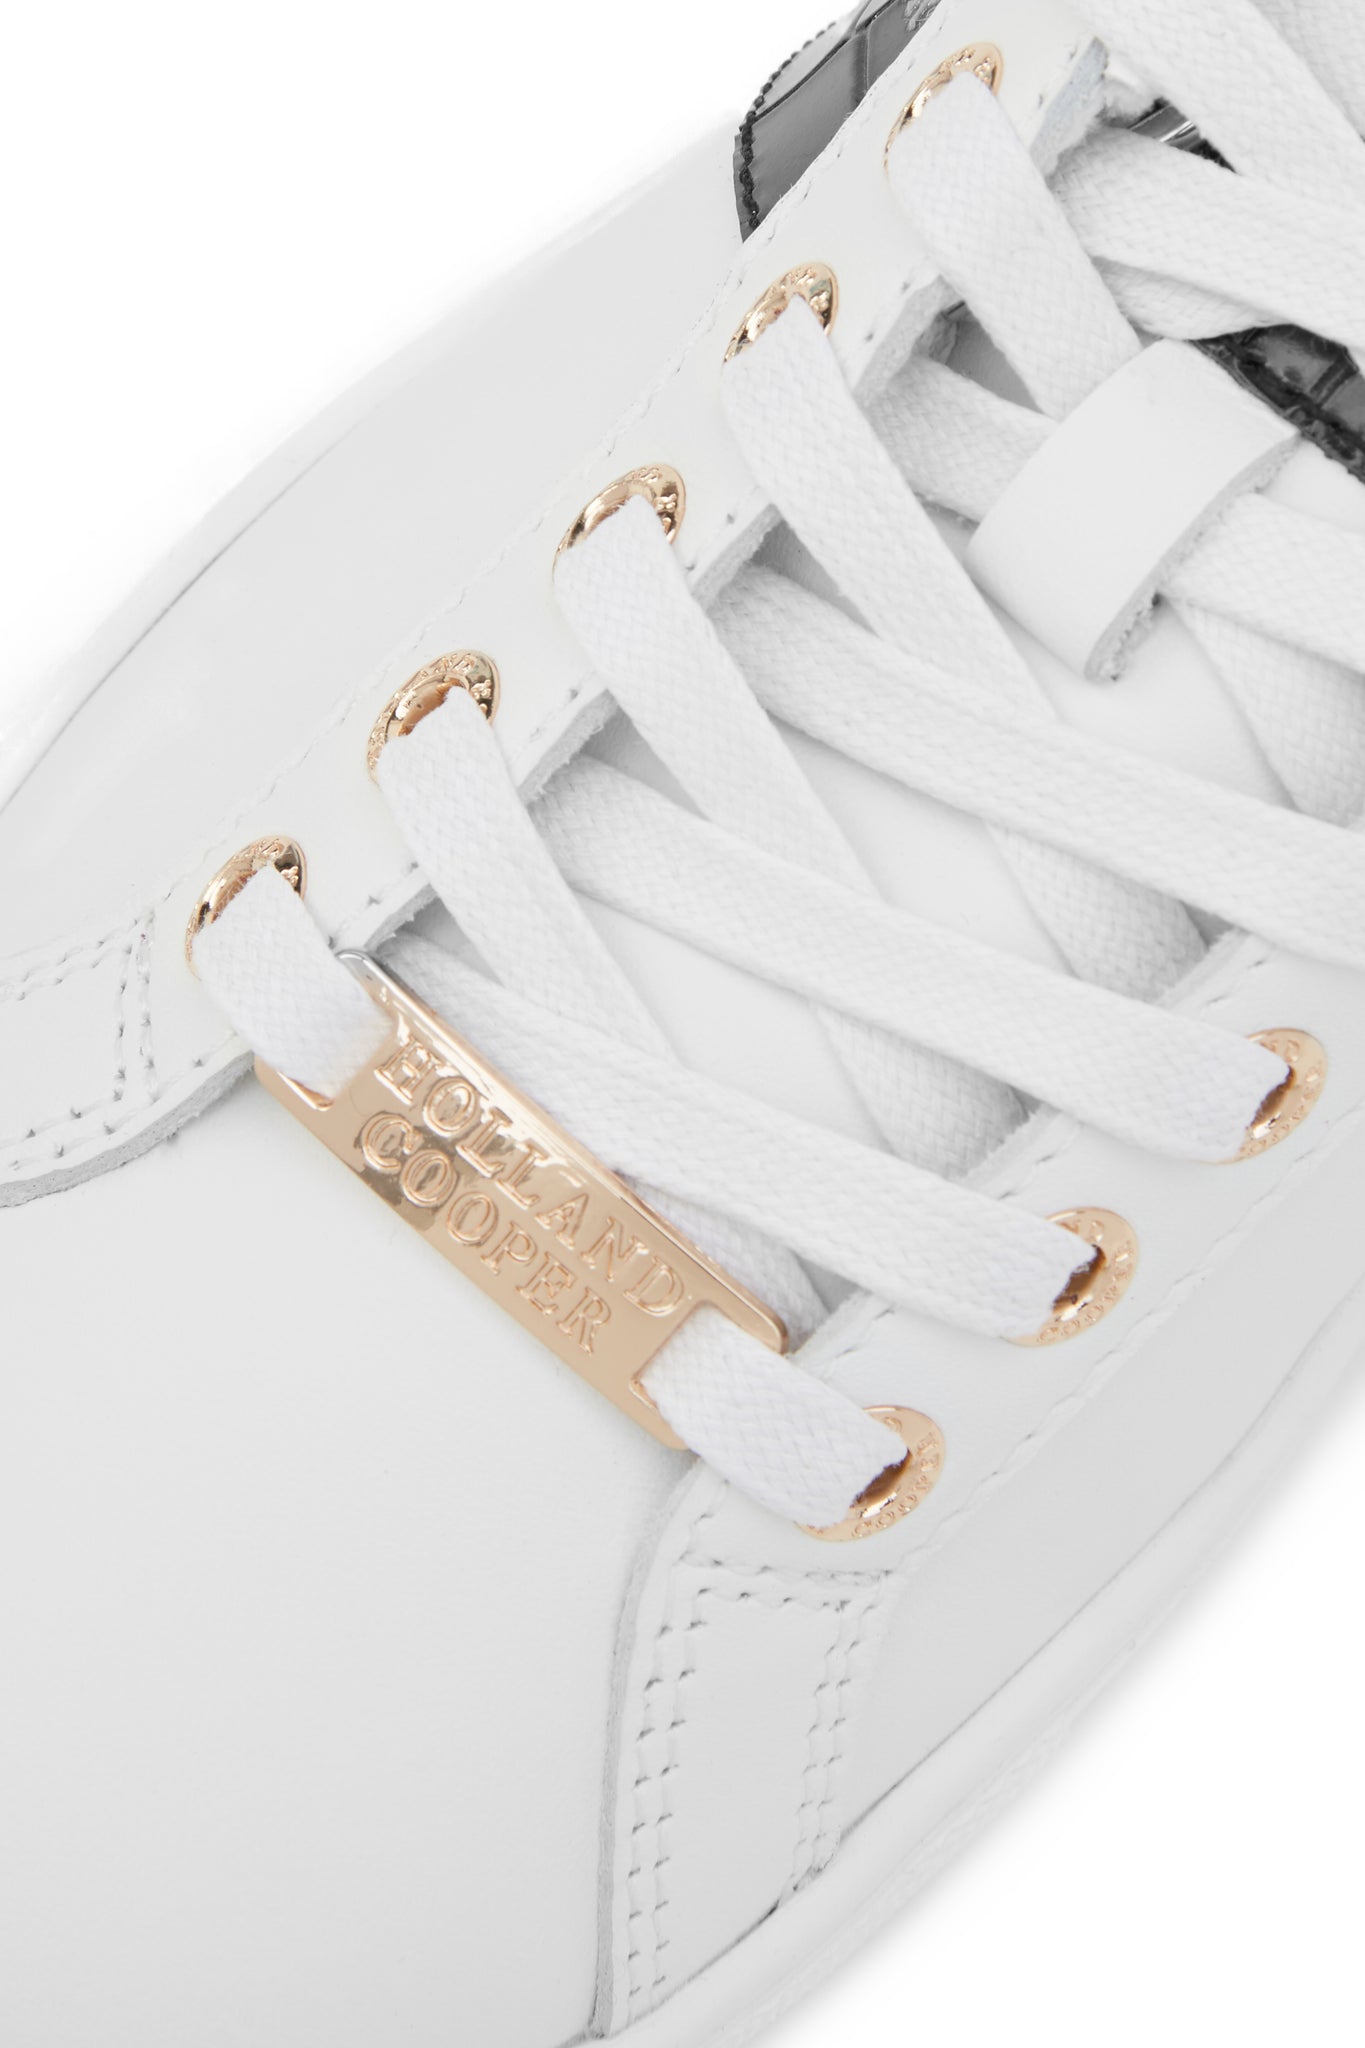 Close up of the white laces with gold hardware